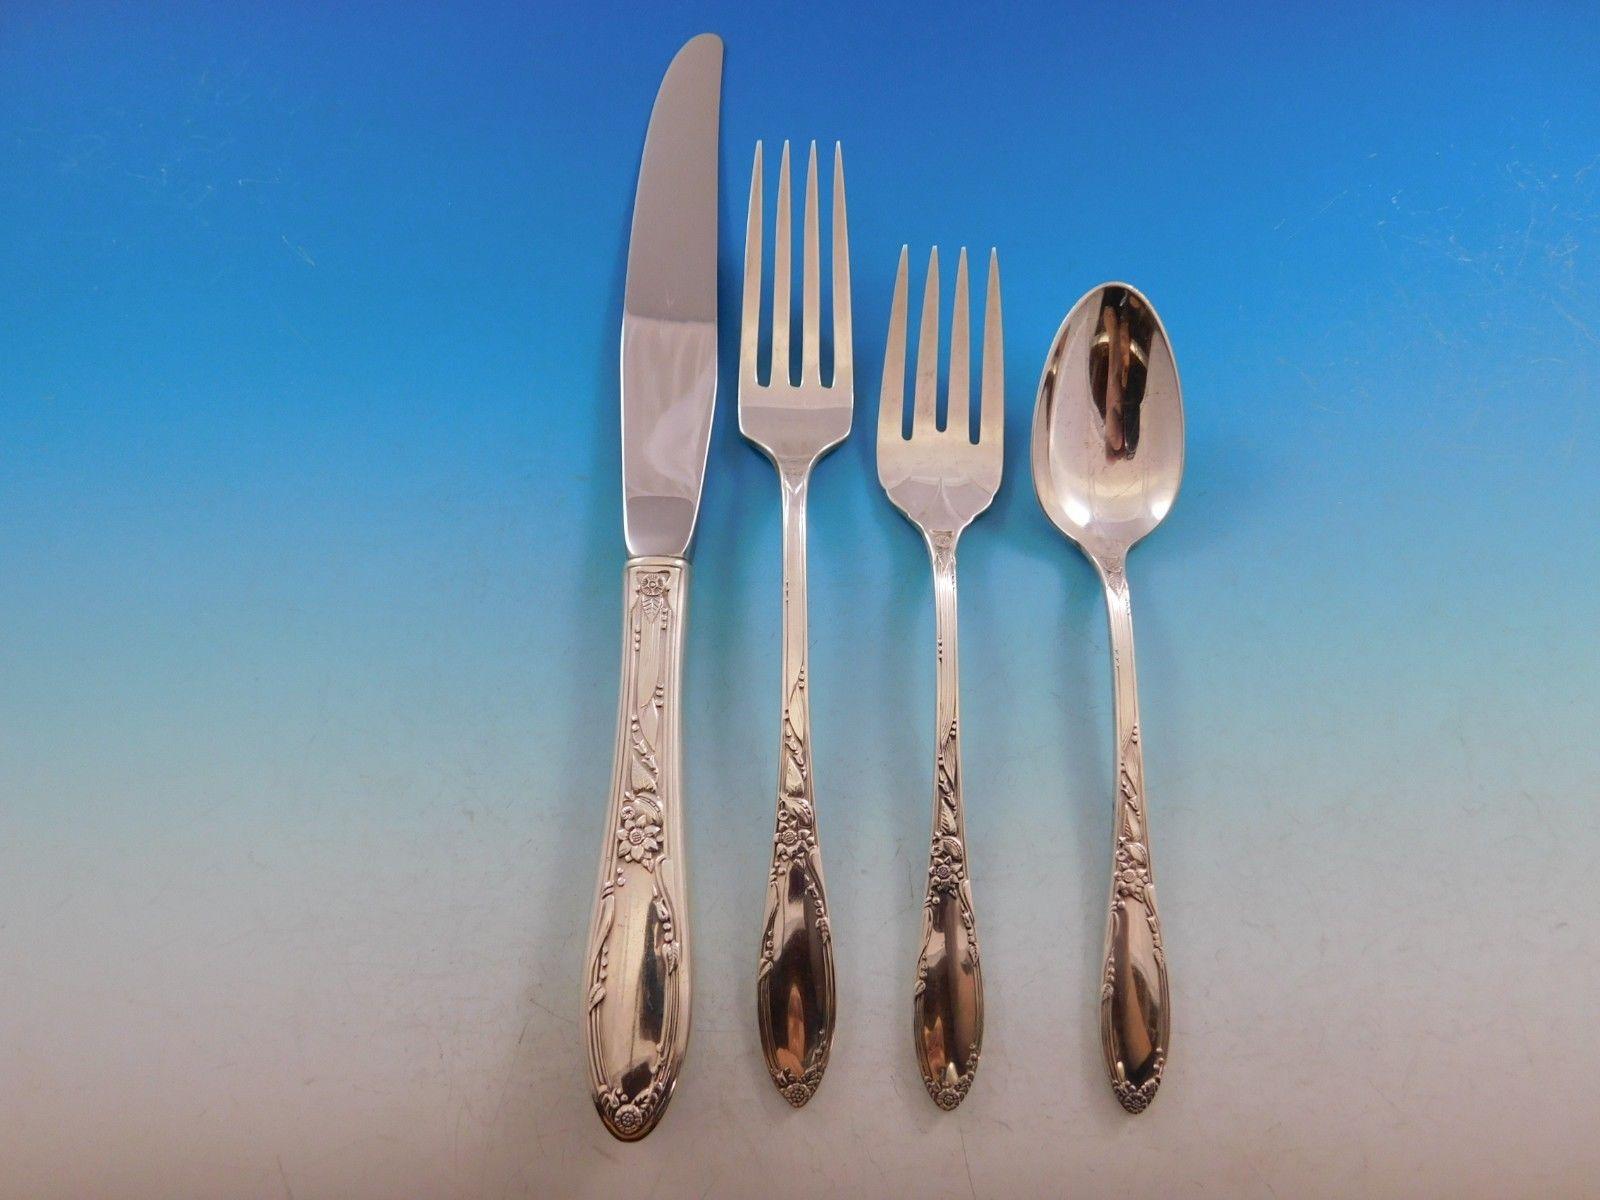 Virginian by Oneida sterling silver flatware set, 35 pieces. Great starter set! This set includes:

6 knives, 9 1/4